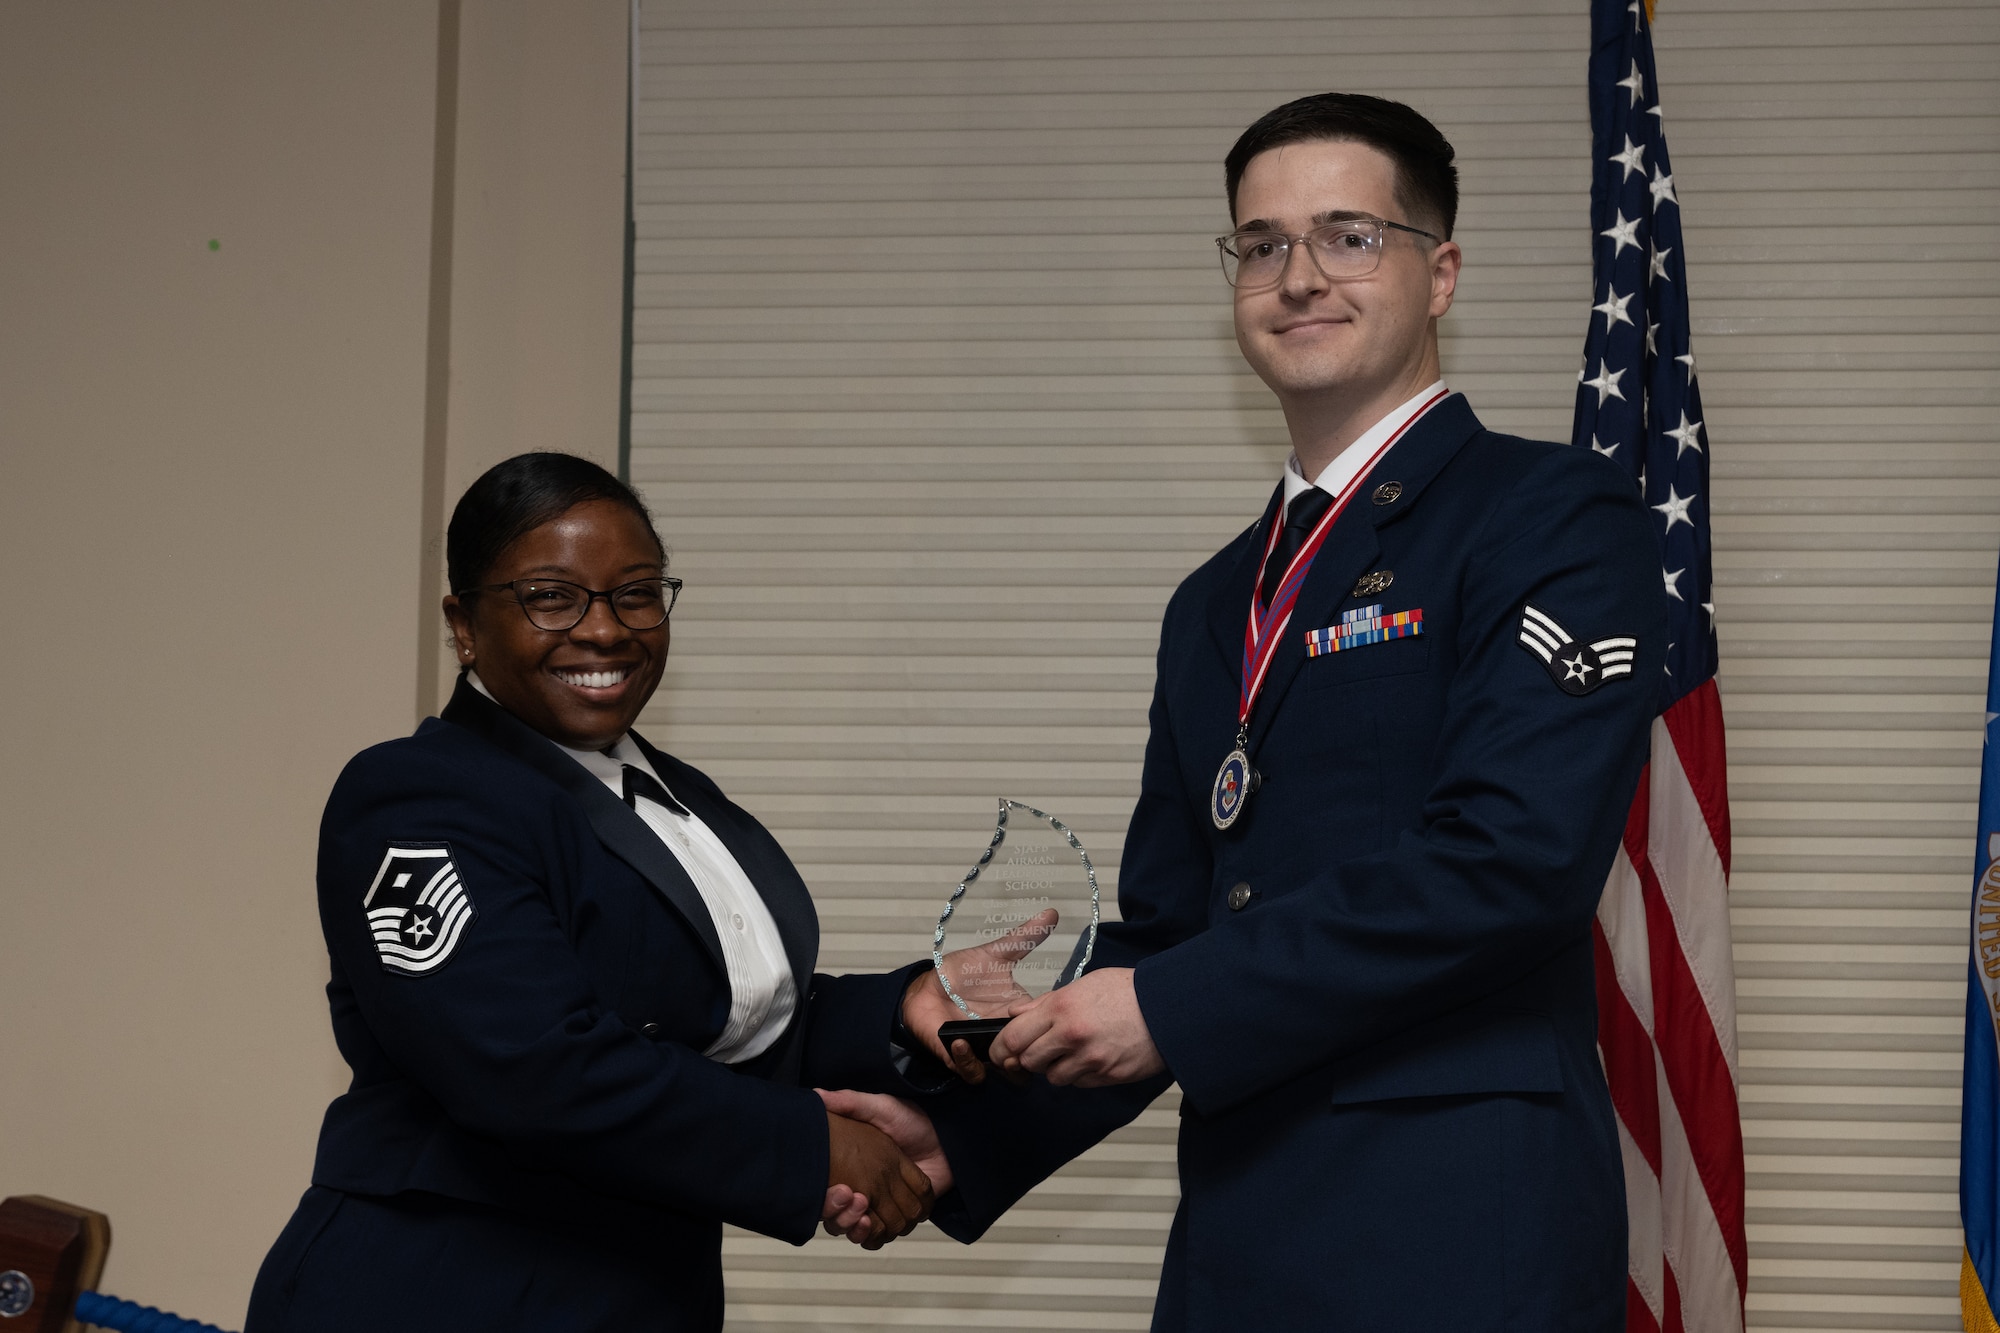 U.S. Air Force Senior Airman Matthew Fox, 4th Component Maintenance Squadron avionics journeyman, receives the Academic Achievement Award from Master Sgt. Kahlia Rainer, 4th Medical group 1st sergeant, during the Airman Leadership School class 24-D graduation ceremony at Seymour Johnson Air Force Base, North Carolina, May 2, 2024. The student presented with the Academic Achievement Award maintained the highest grade point average throughout the ALS course. (U.S. Air Force photo by Airman Megan Cusmano)